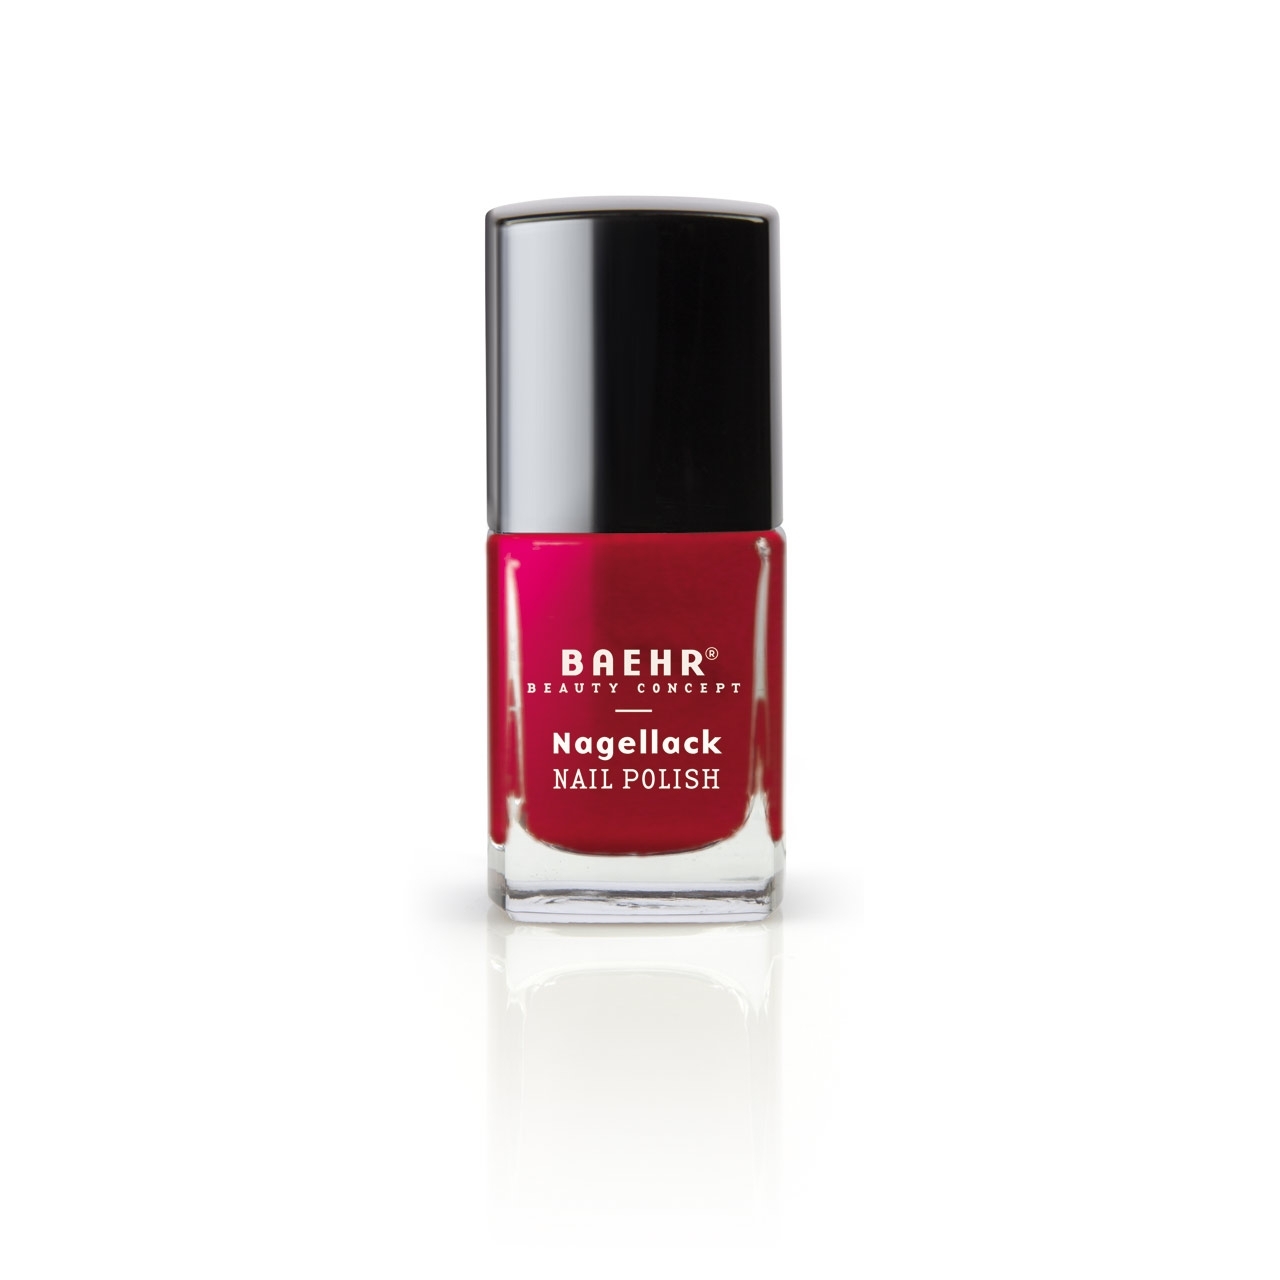 BAEHR BEAUTY CONCEPT - NAILS Nagellack cardinal red pearl 11 ml